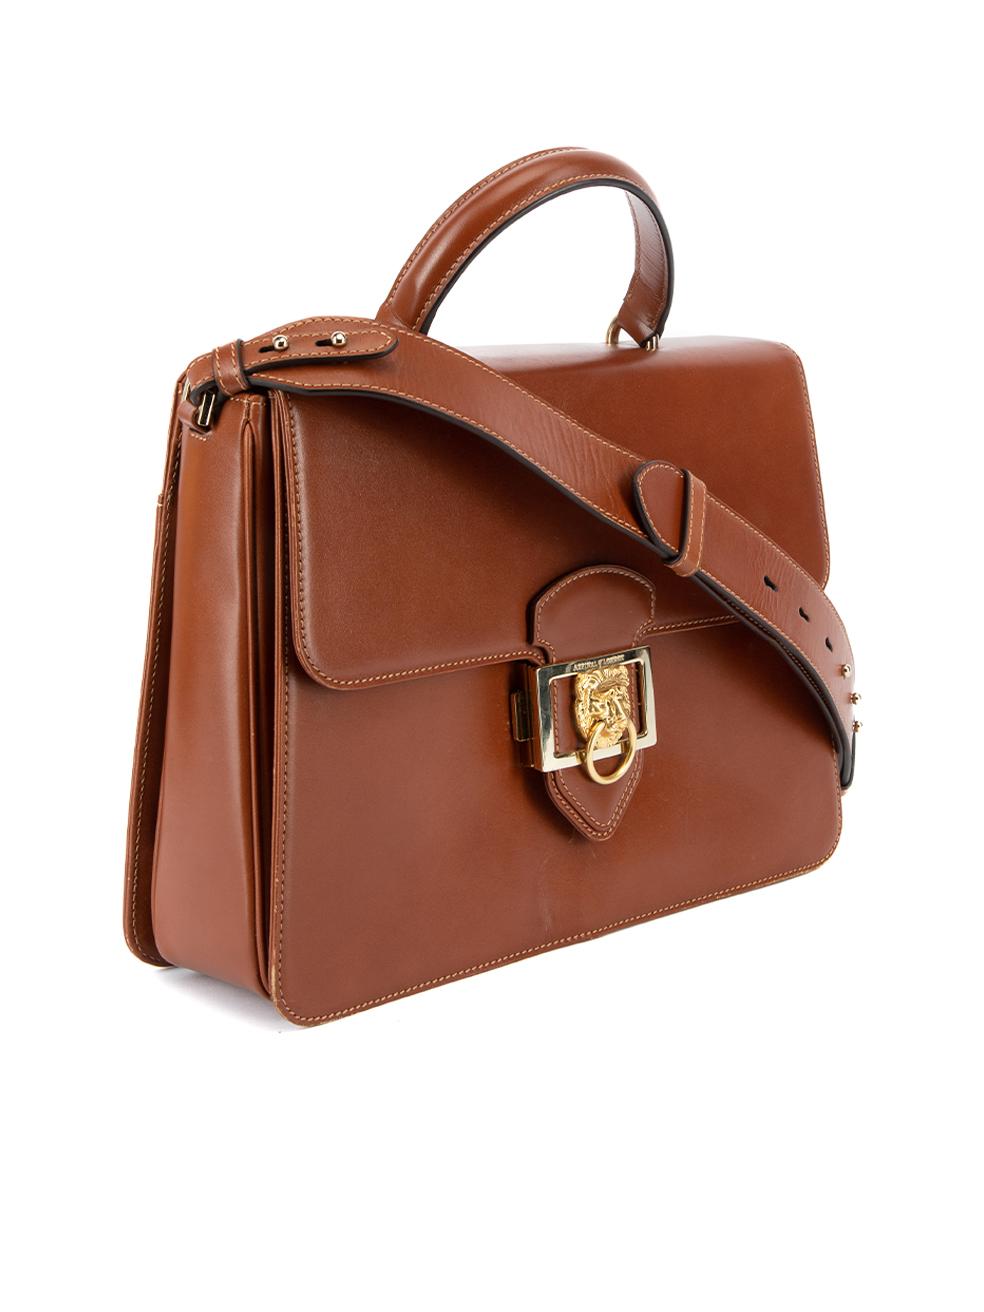 CONDITION is Very good. Minimal wear to bag is evident. Minimal wear and creasing to the exterior leather. There are scuffs on the bag and the leather is also scuffed around the edges and the point of the bag flap. The interior of the bag also has